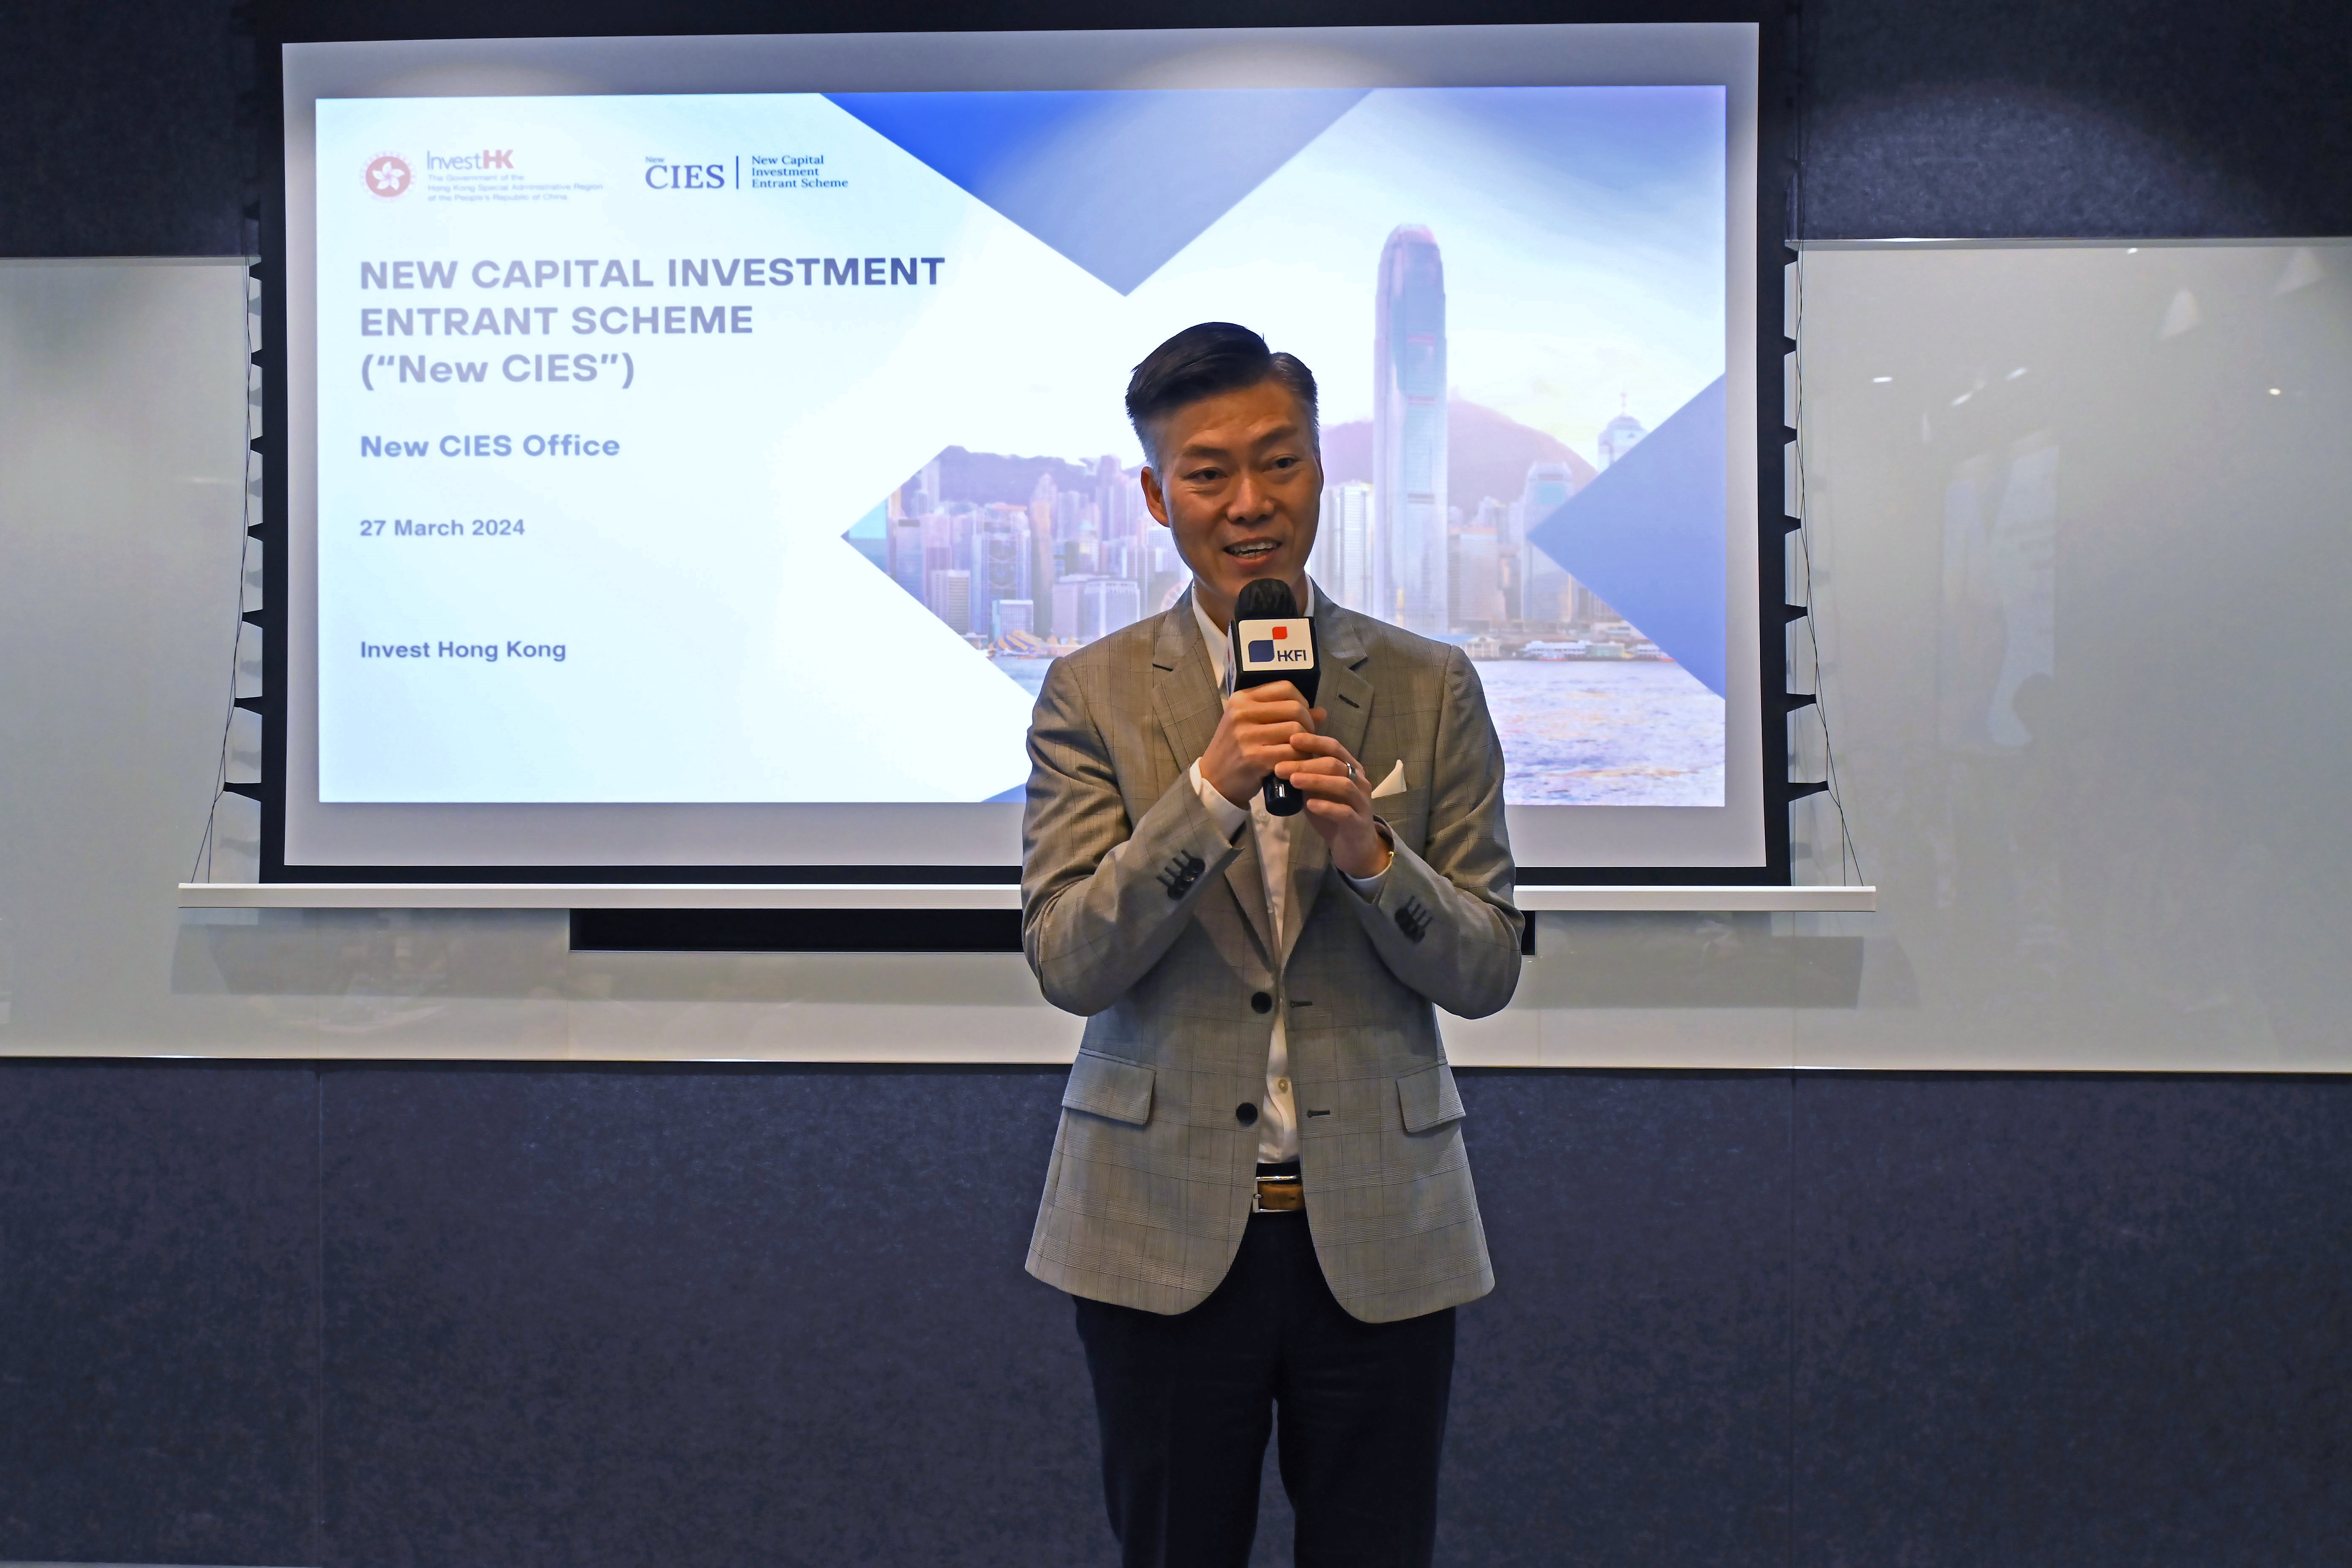 Information and Exchange Session on Capital Investment Entrant Scheme (CIES) with InvestHK